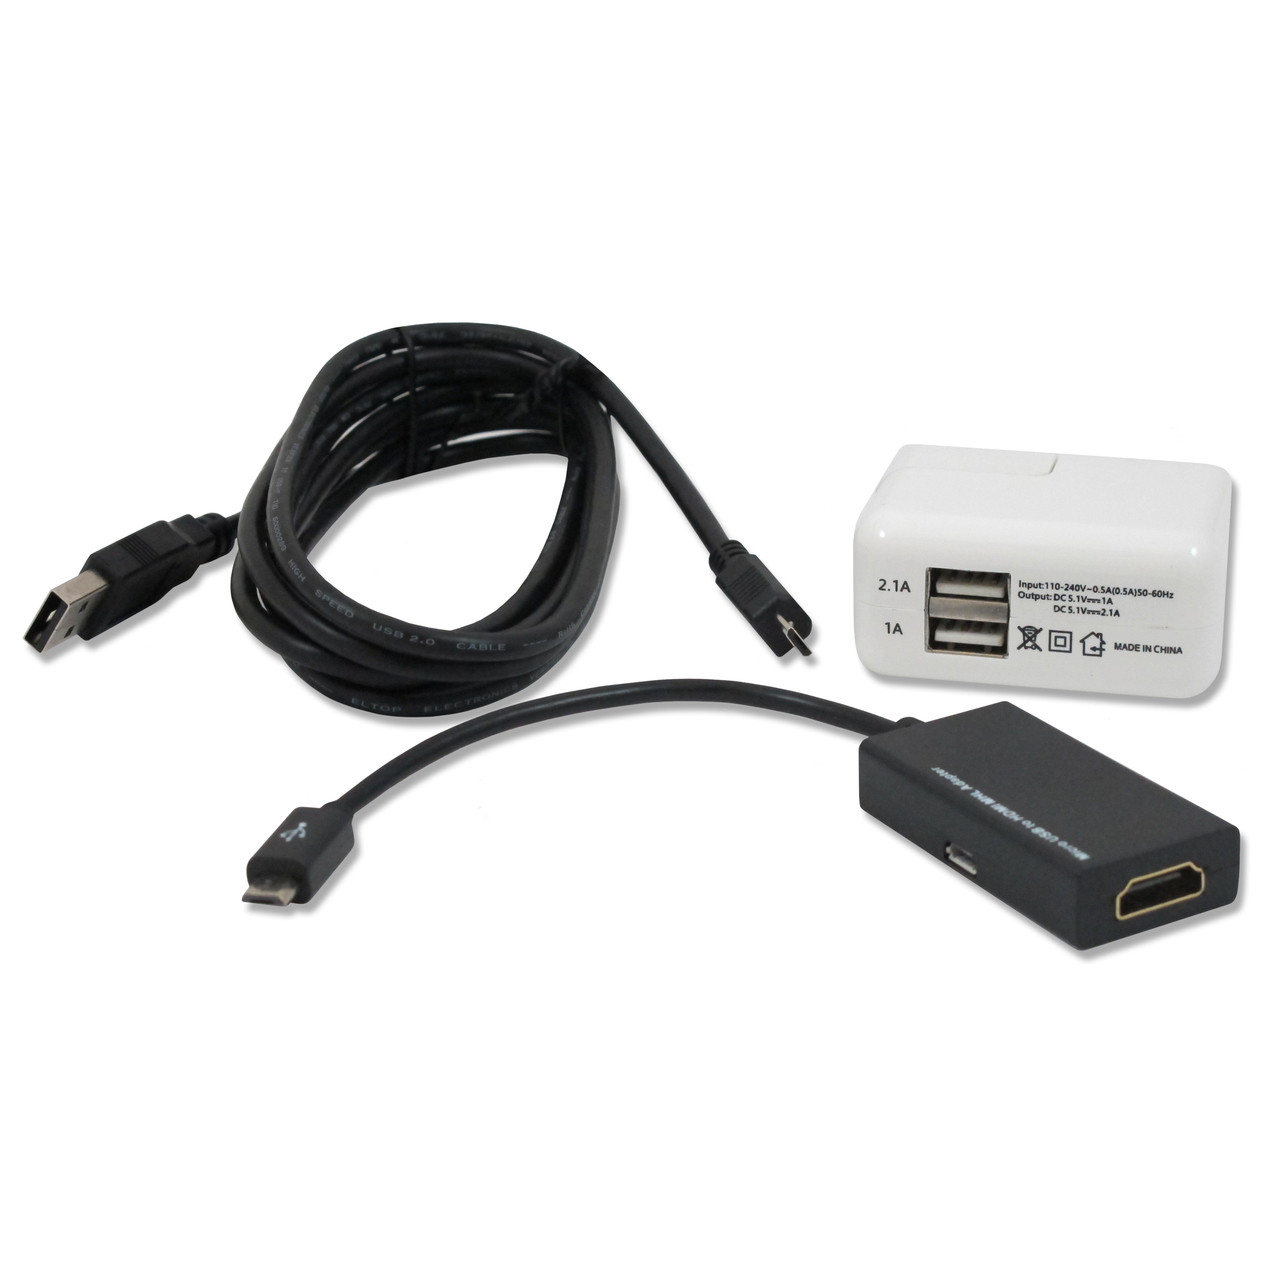 Cable Hdmi Android Ios App Cable Usb Hdmi Mhl Mayorias Gamas